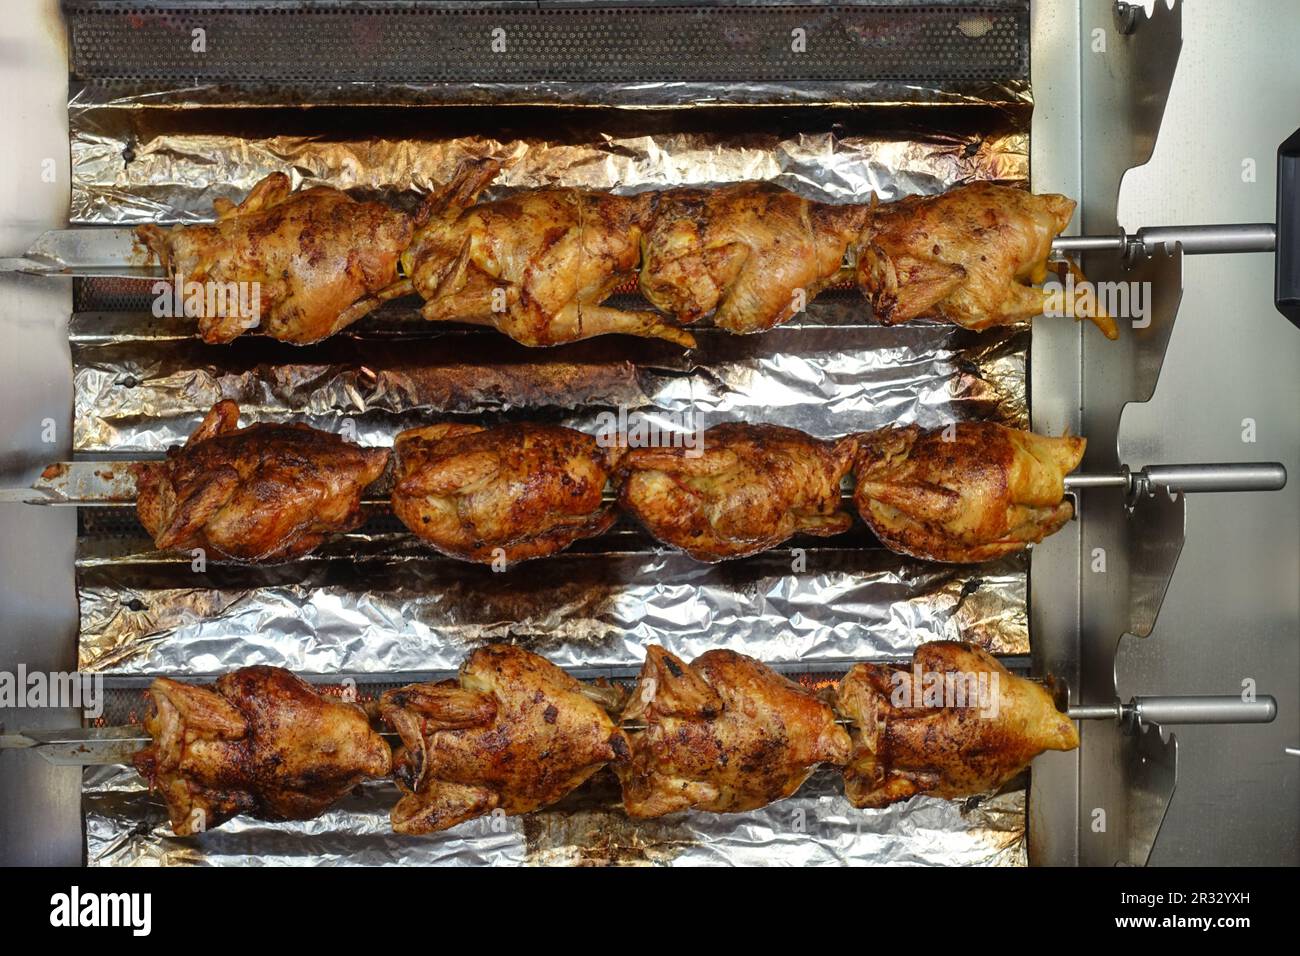 https://c8.alamy.com/comp/2R32YXH/a-stack-of-grilled-chicken-on-a-skewer-fried-in-a-commercial-oven-at-a-farmers-market-in-france-bar-b-q-heat-horizontal-inside-machine-shop-ski-2R32YXH.jpg